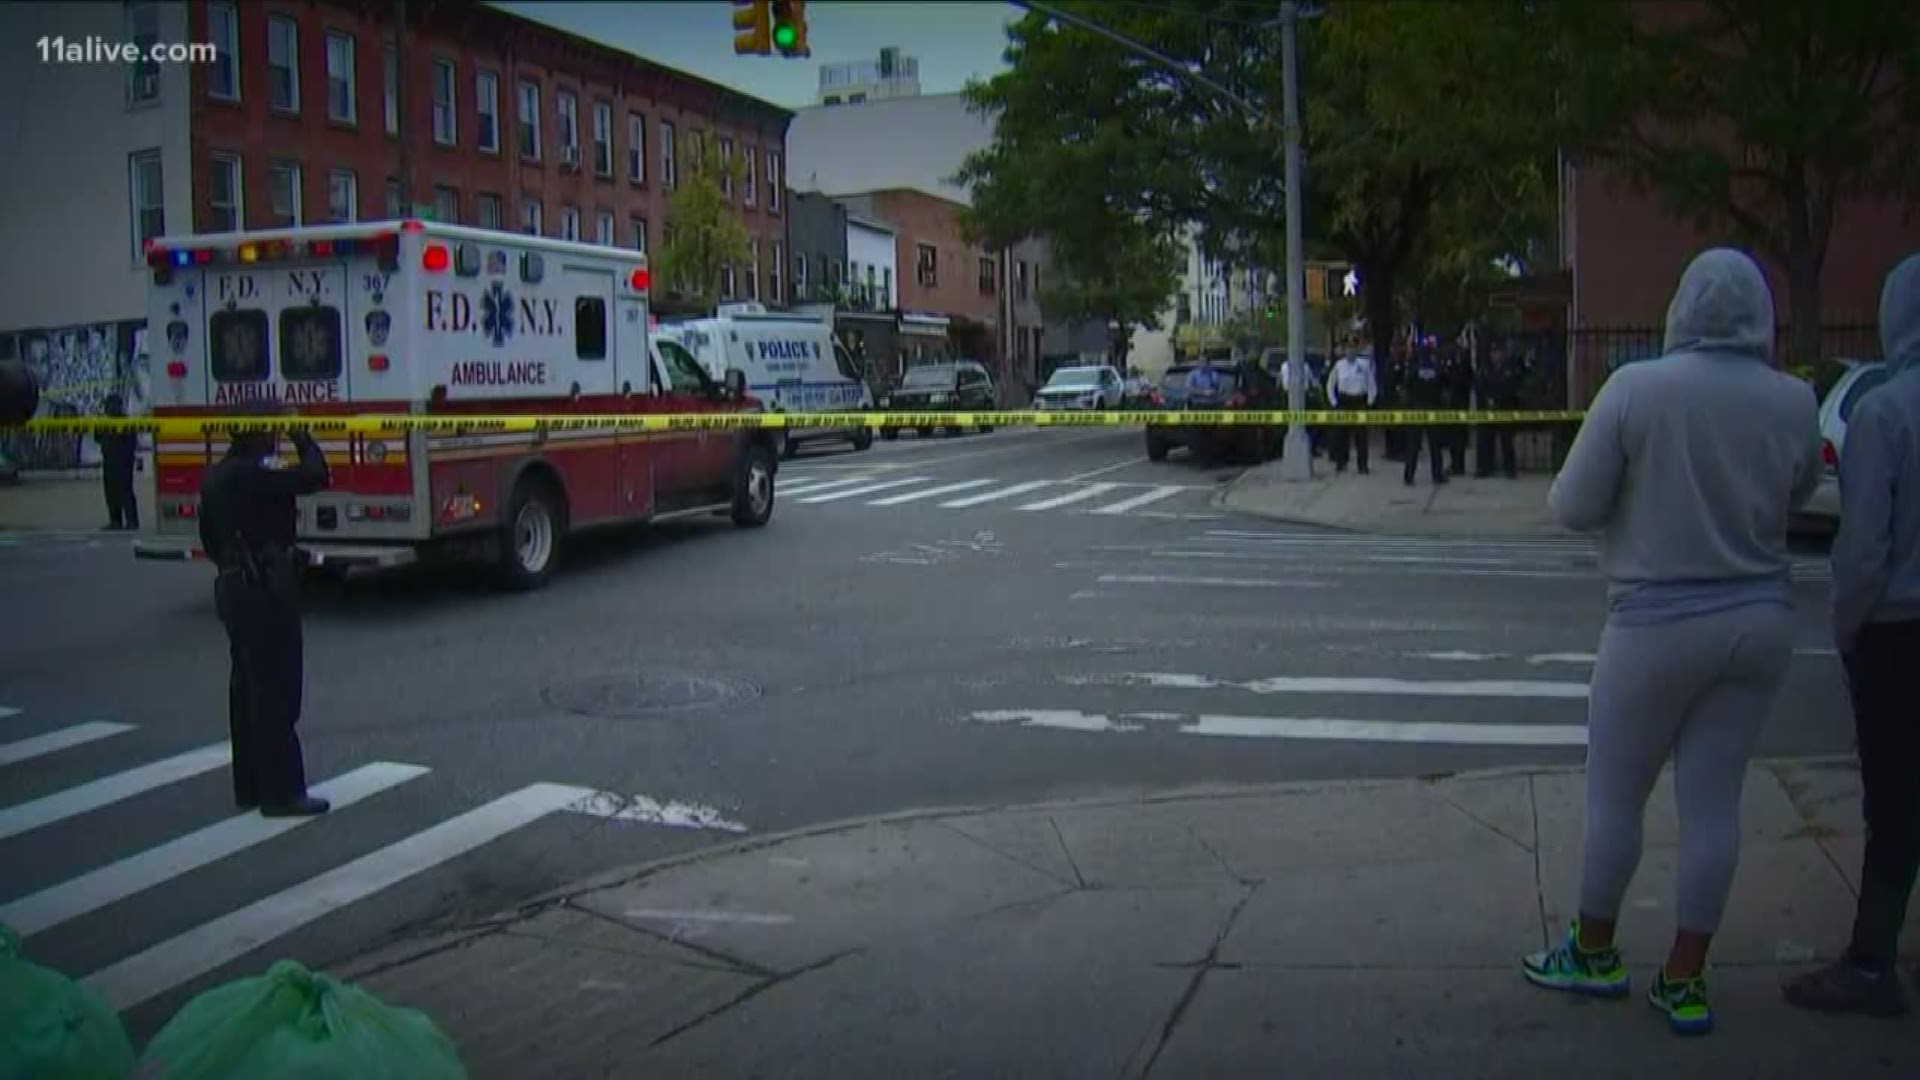 Four people were killed on Saturday in Brooklyn and two of those men were from Georgia.